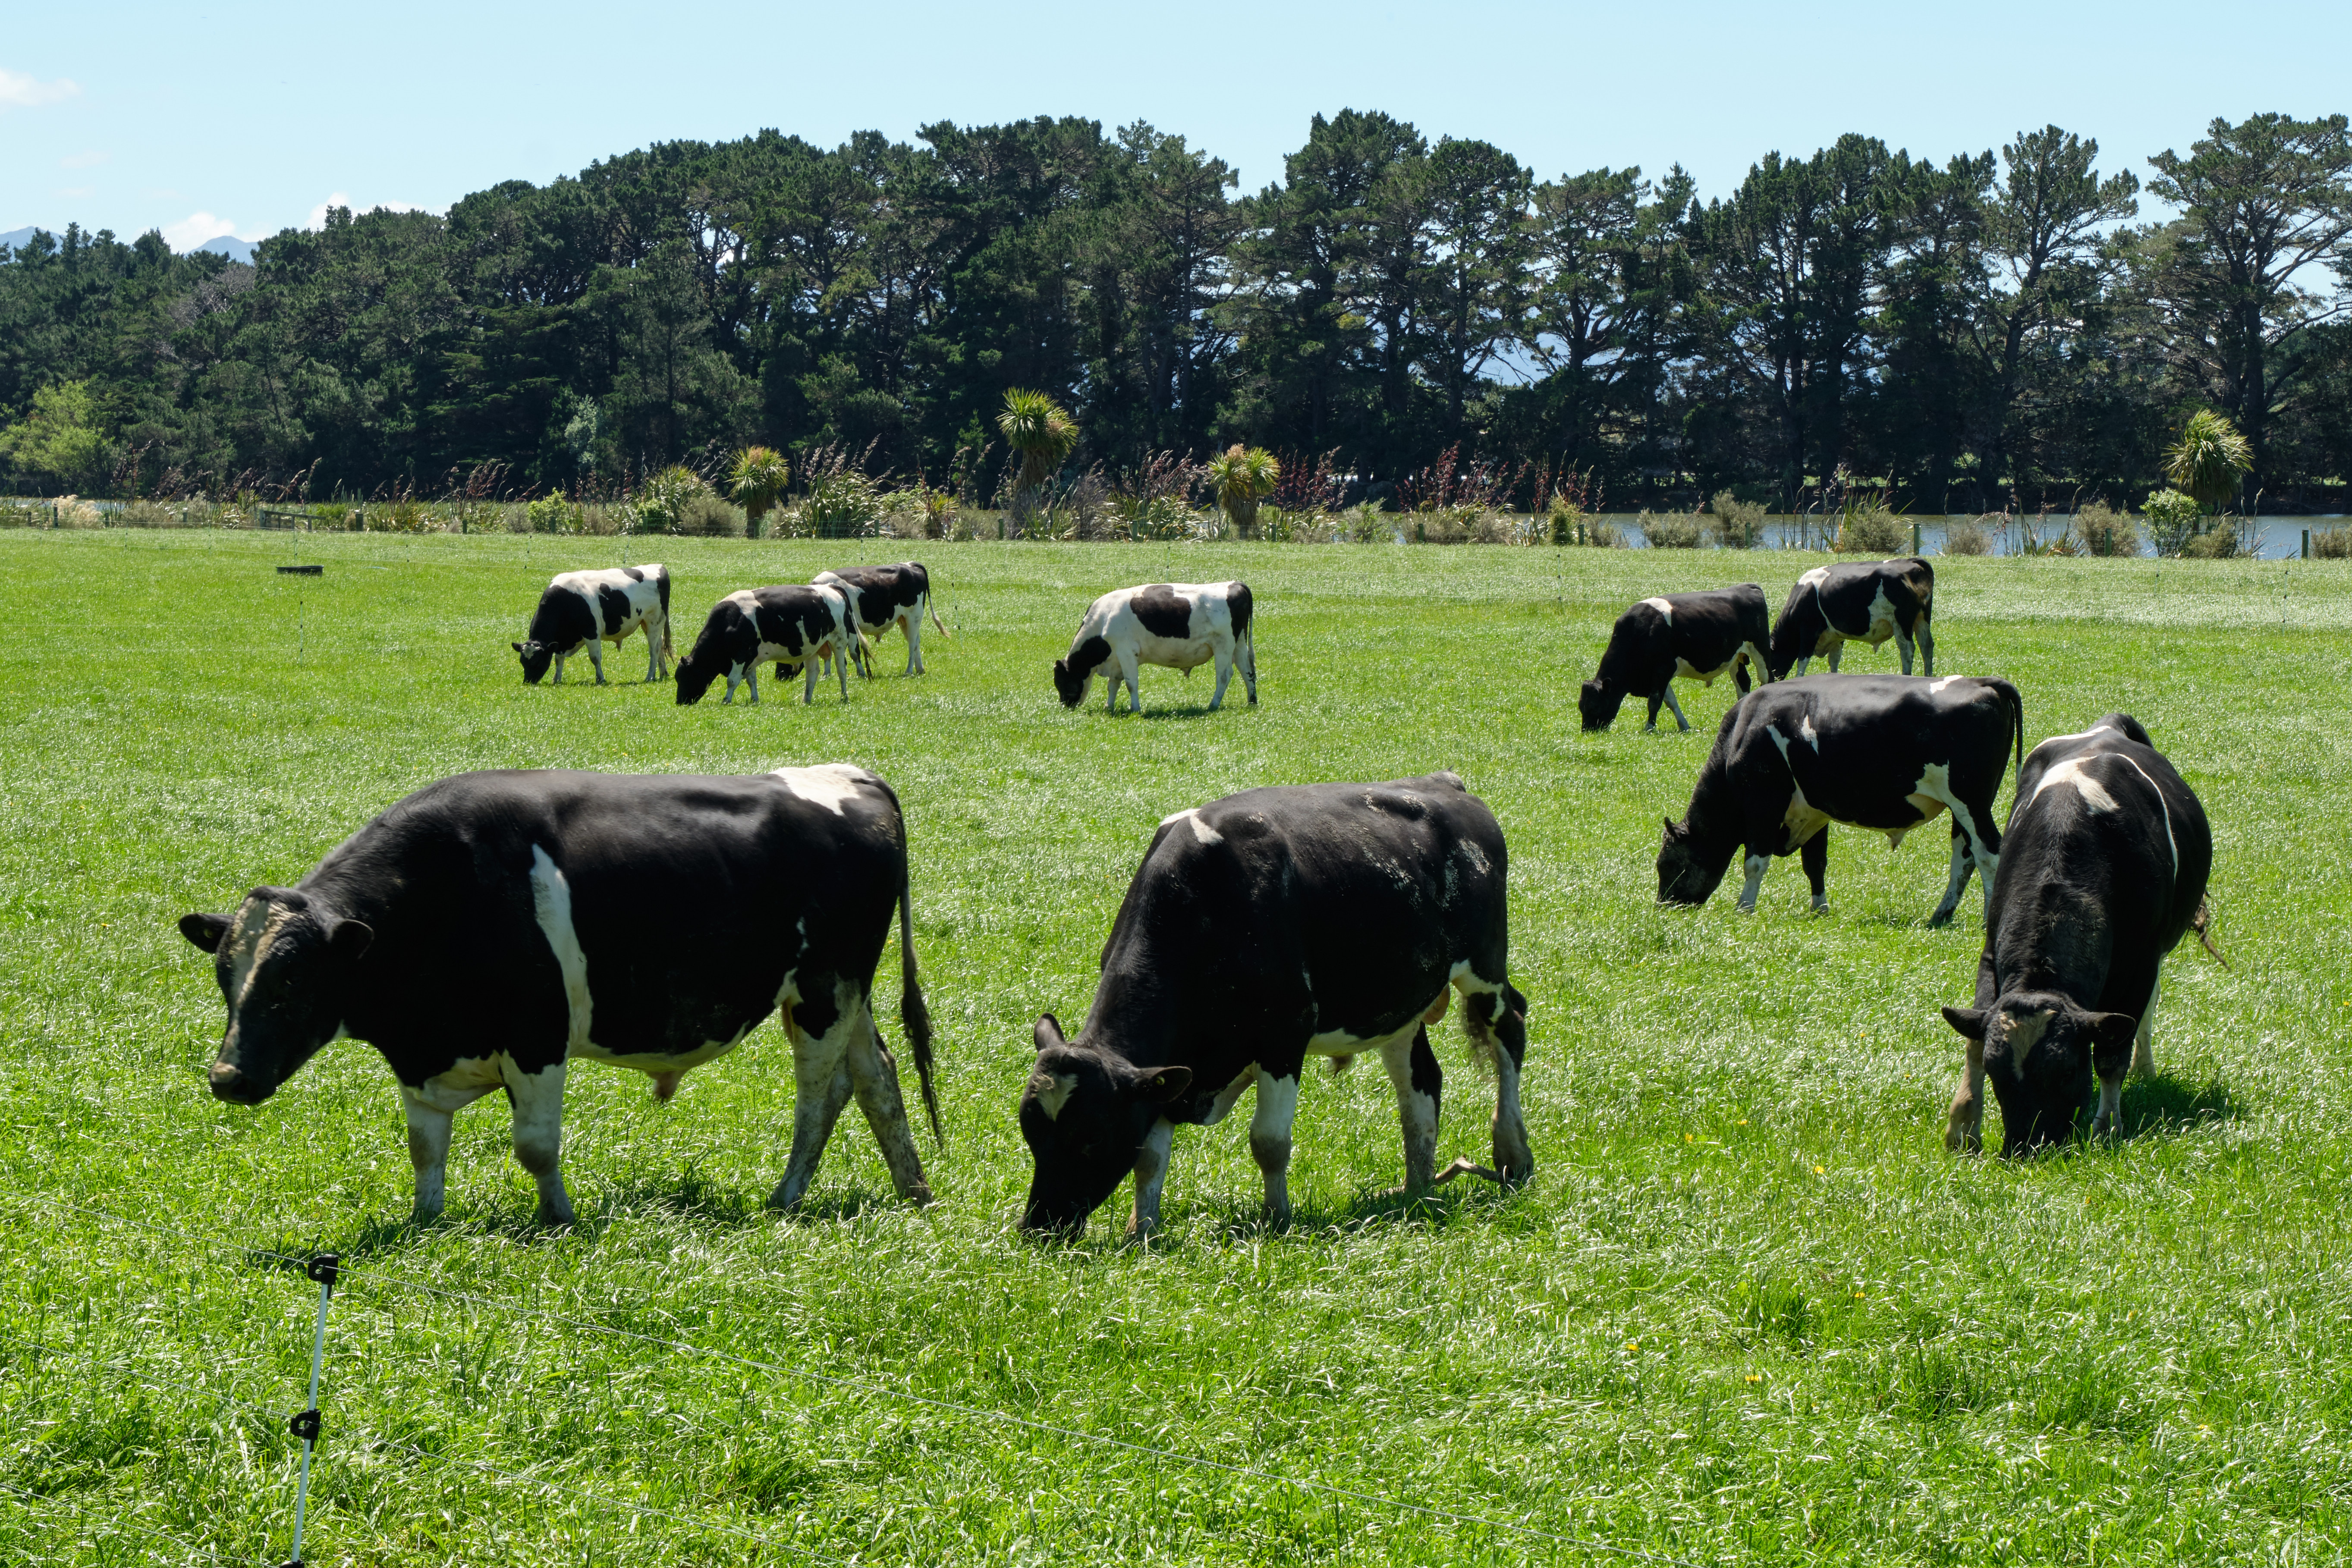 Cows grazing in a paddock